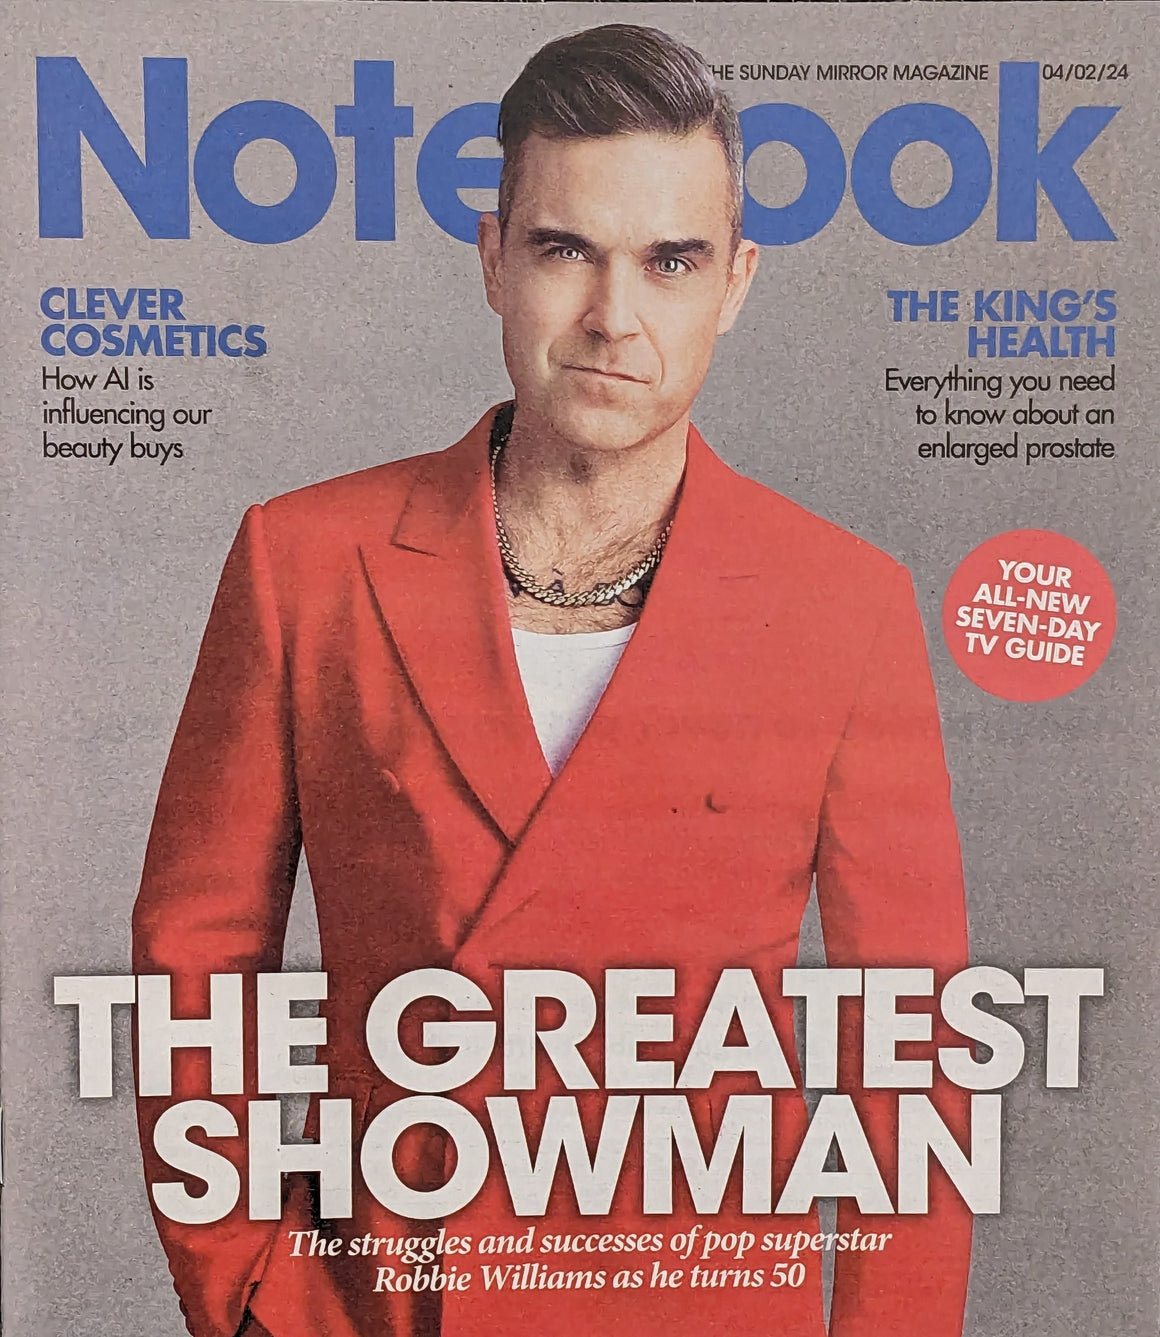 NOTEBOOK Magazine February 2024: ROBBIE WILLIAMS COVER FEATURE